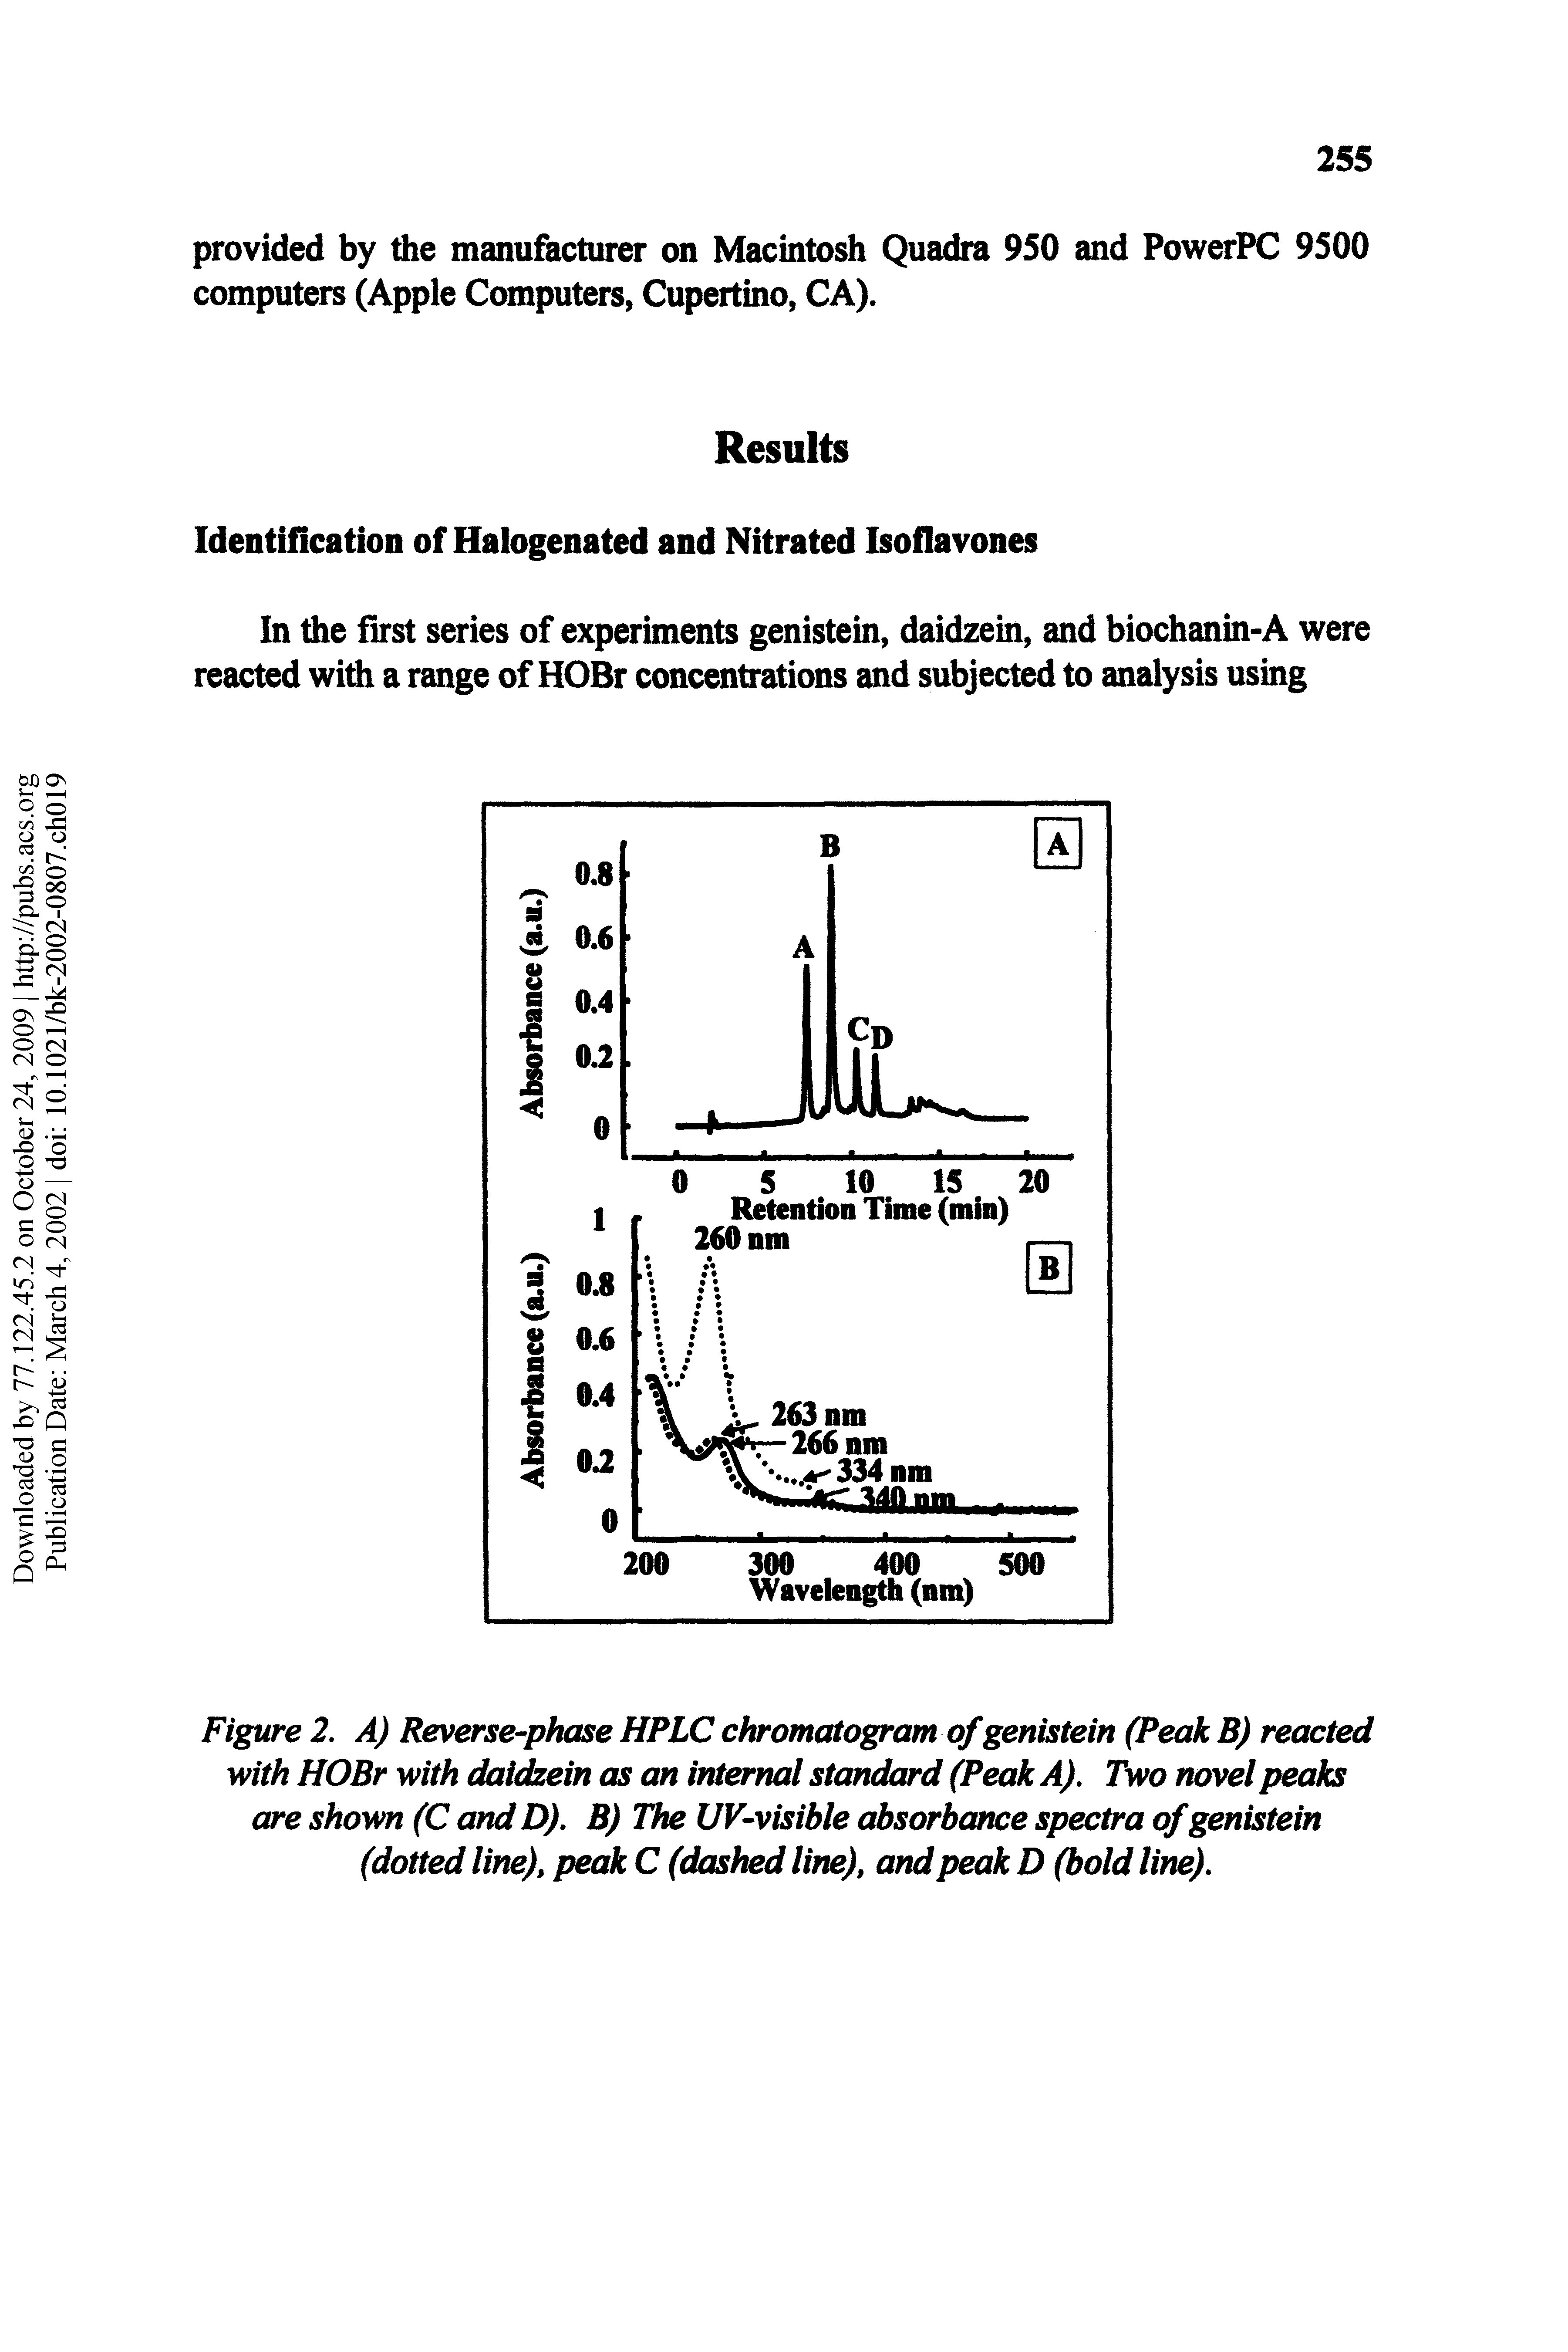 Figure 2. A) Reverse-phase HPLC chromatogram of genistein (Peak B) reacted with HOBr with daidzein as an internal standard (Peak A). Two novel peaks are shown (C and D). B) 7%e UV-visible absorbance spectra of genistein (dotted line), peak C (dashed line), and peak D (bold line).